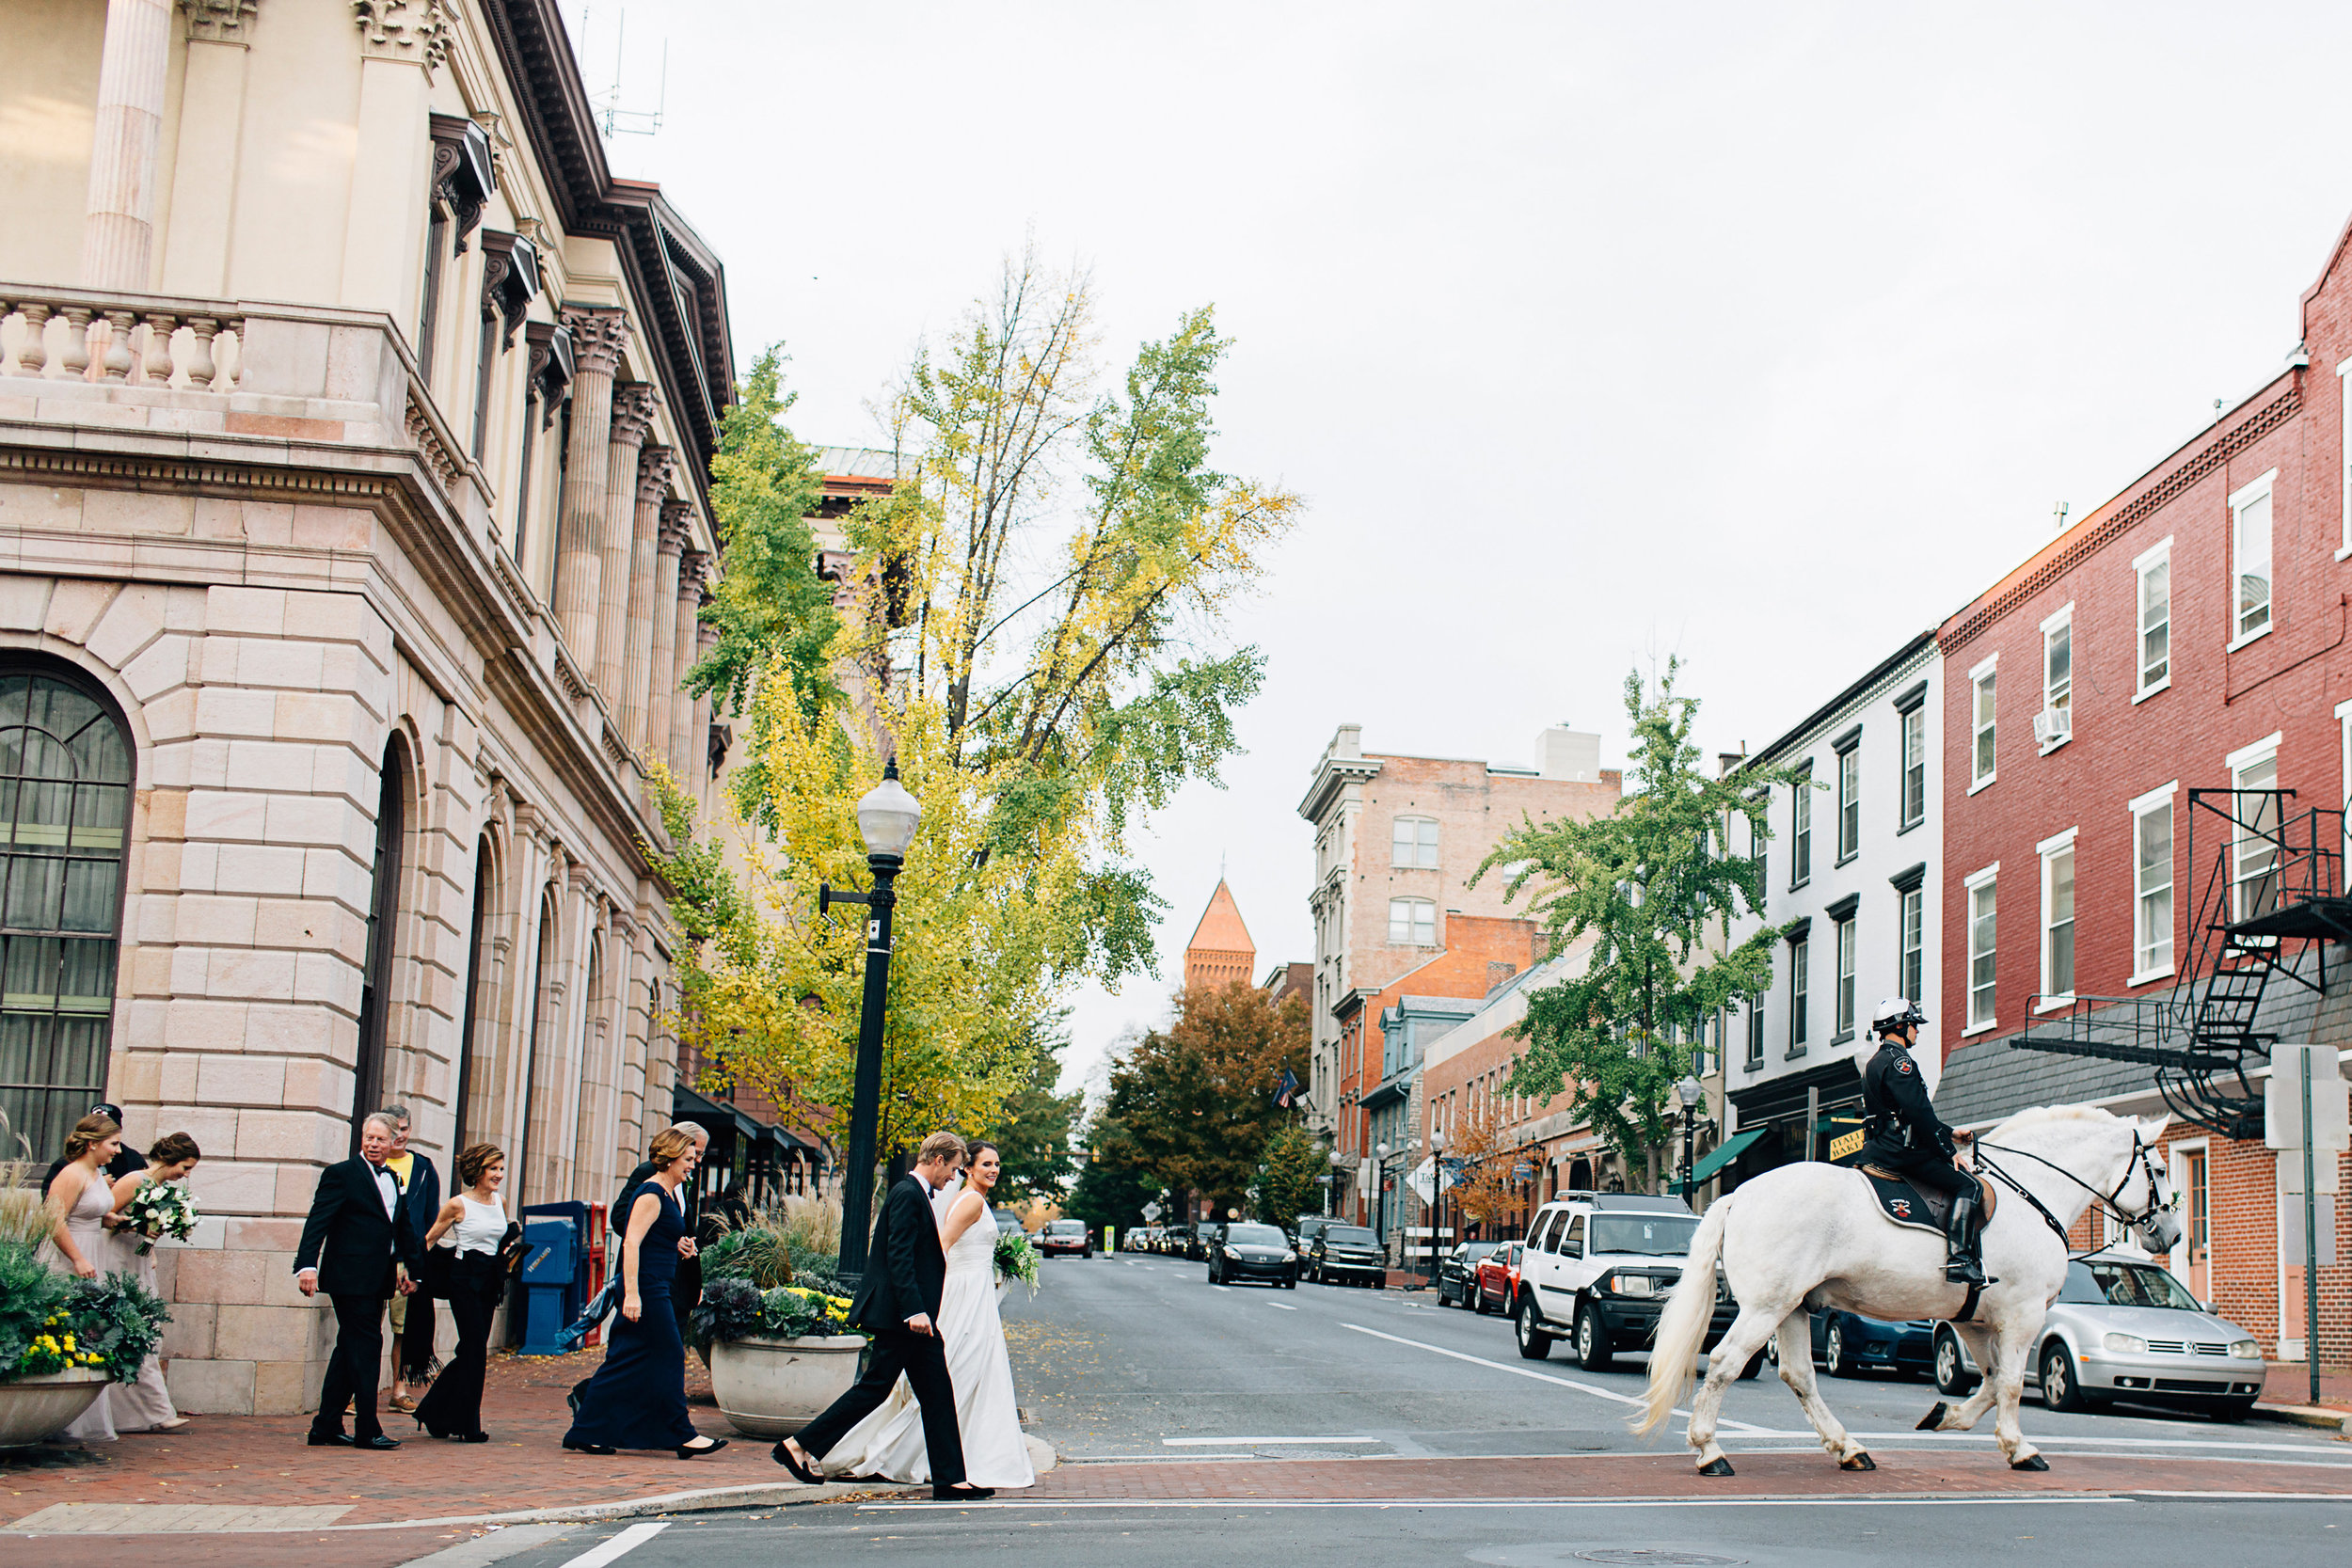 Bridal Party walking across street downtown Lancaster Pennsylvania behind mounted police on horse